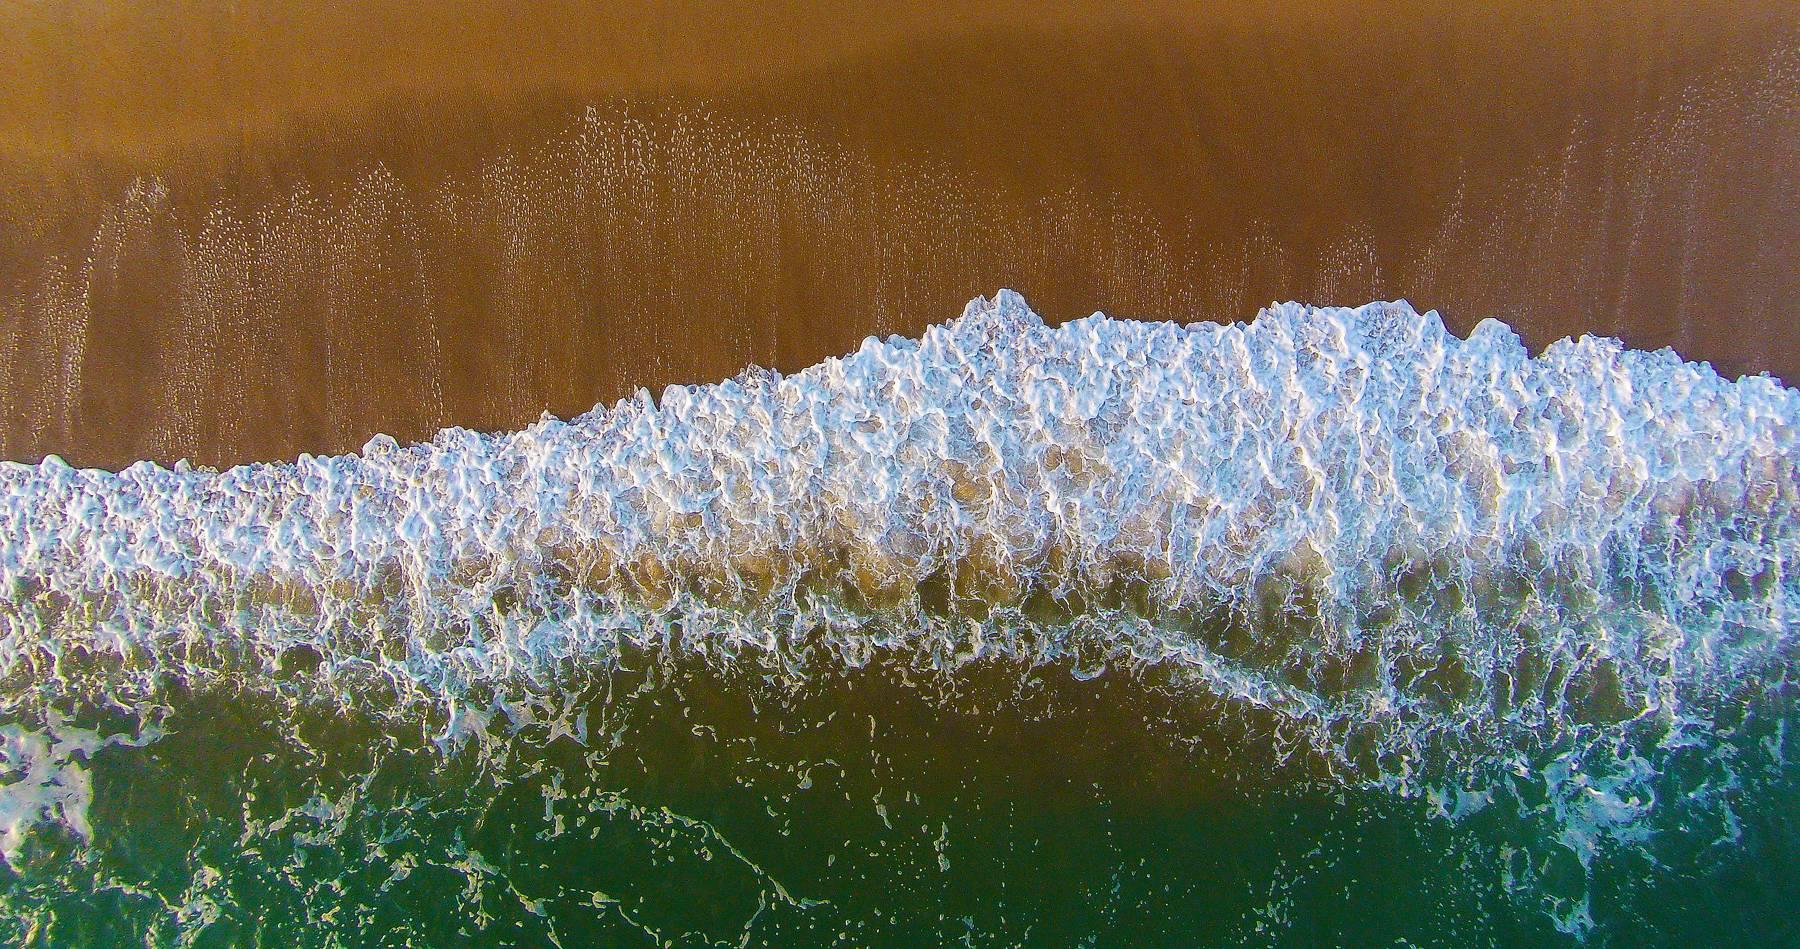 Albert Delamour Landscape Photograph - Aerial view of the beach, wave